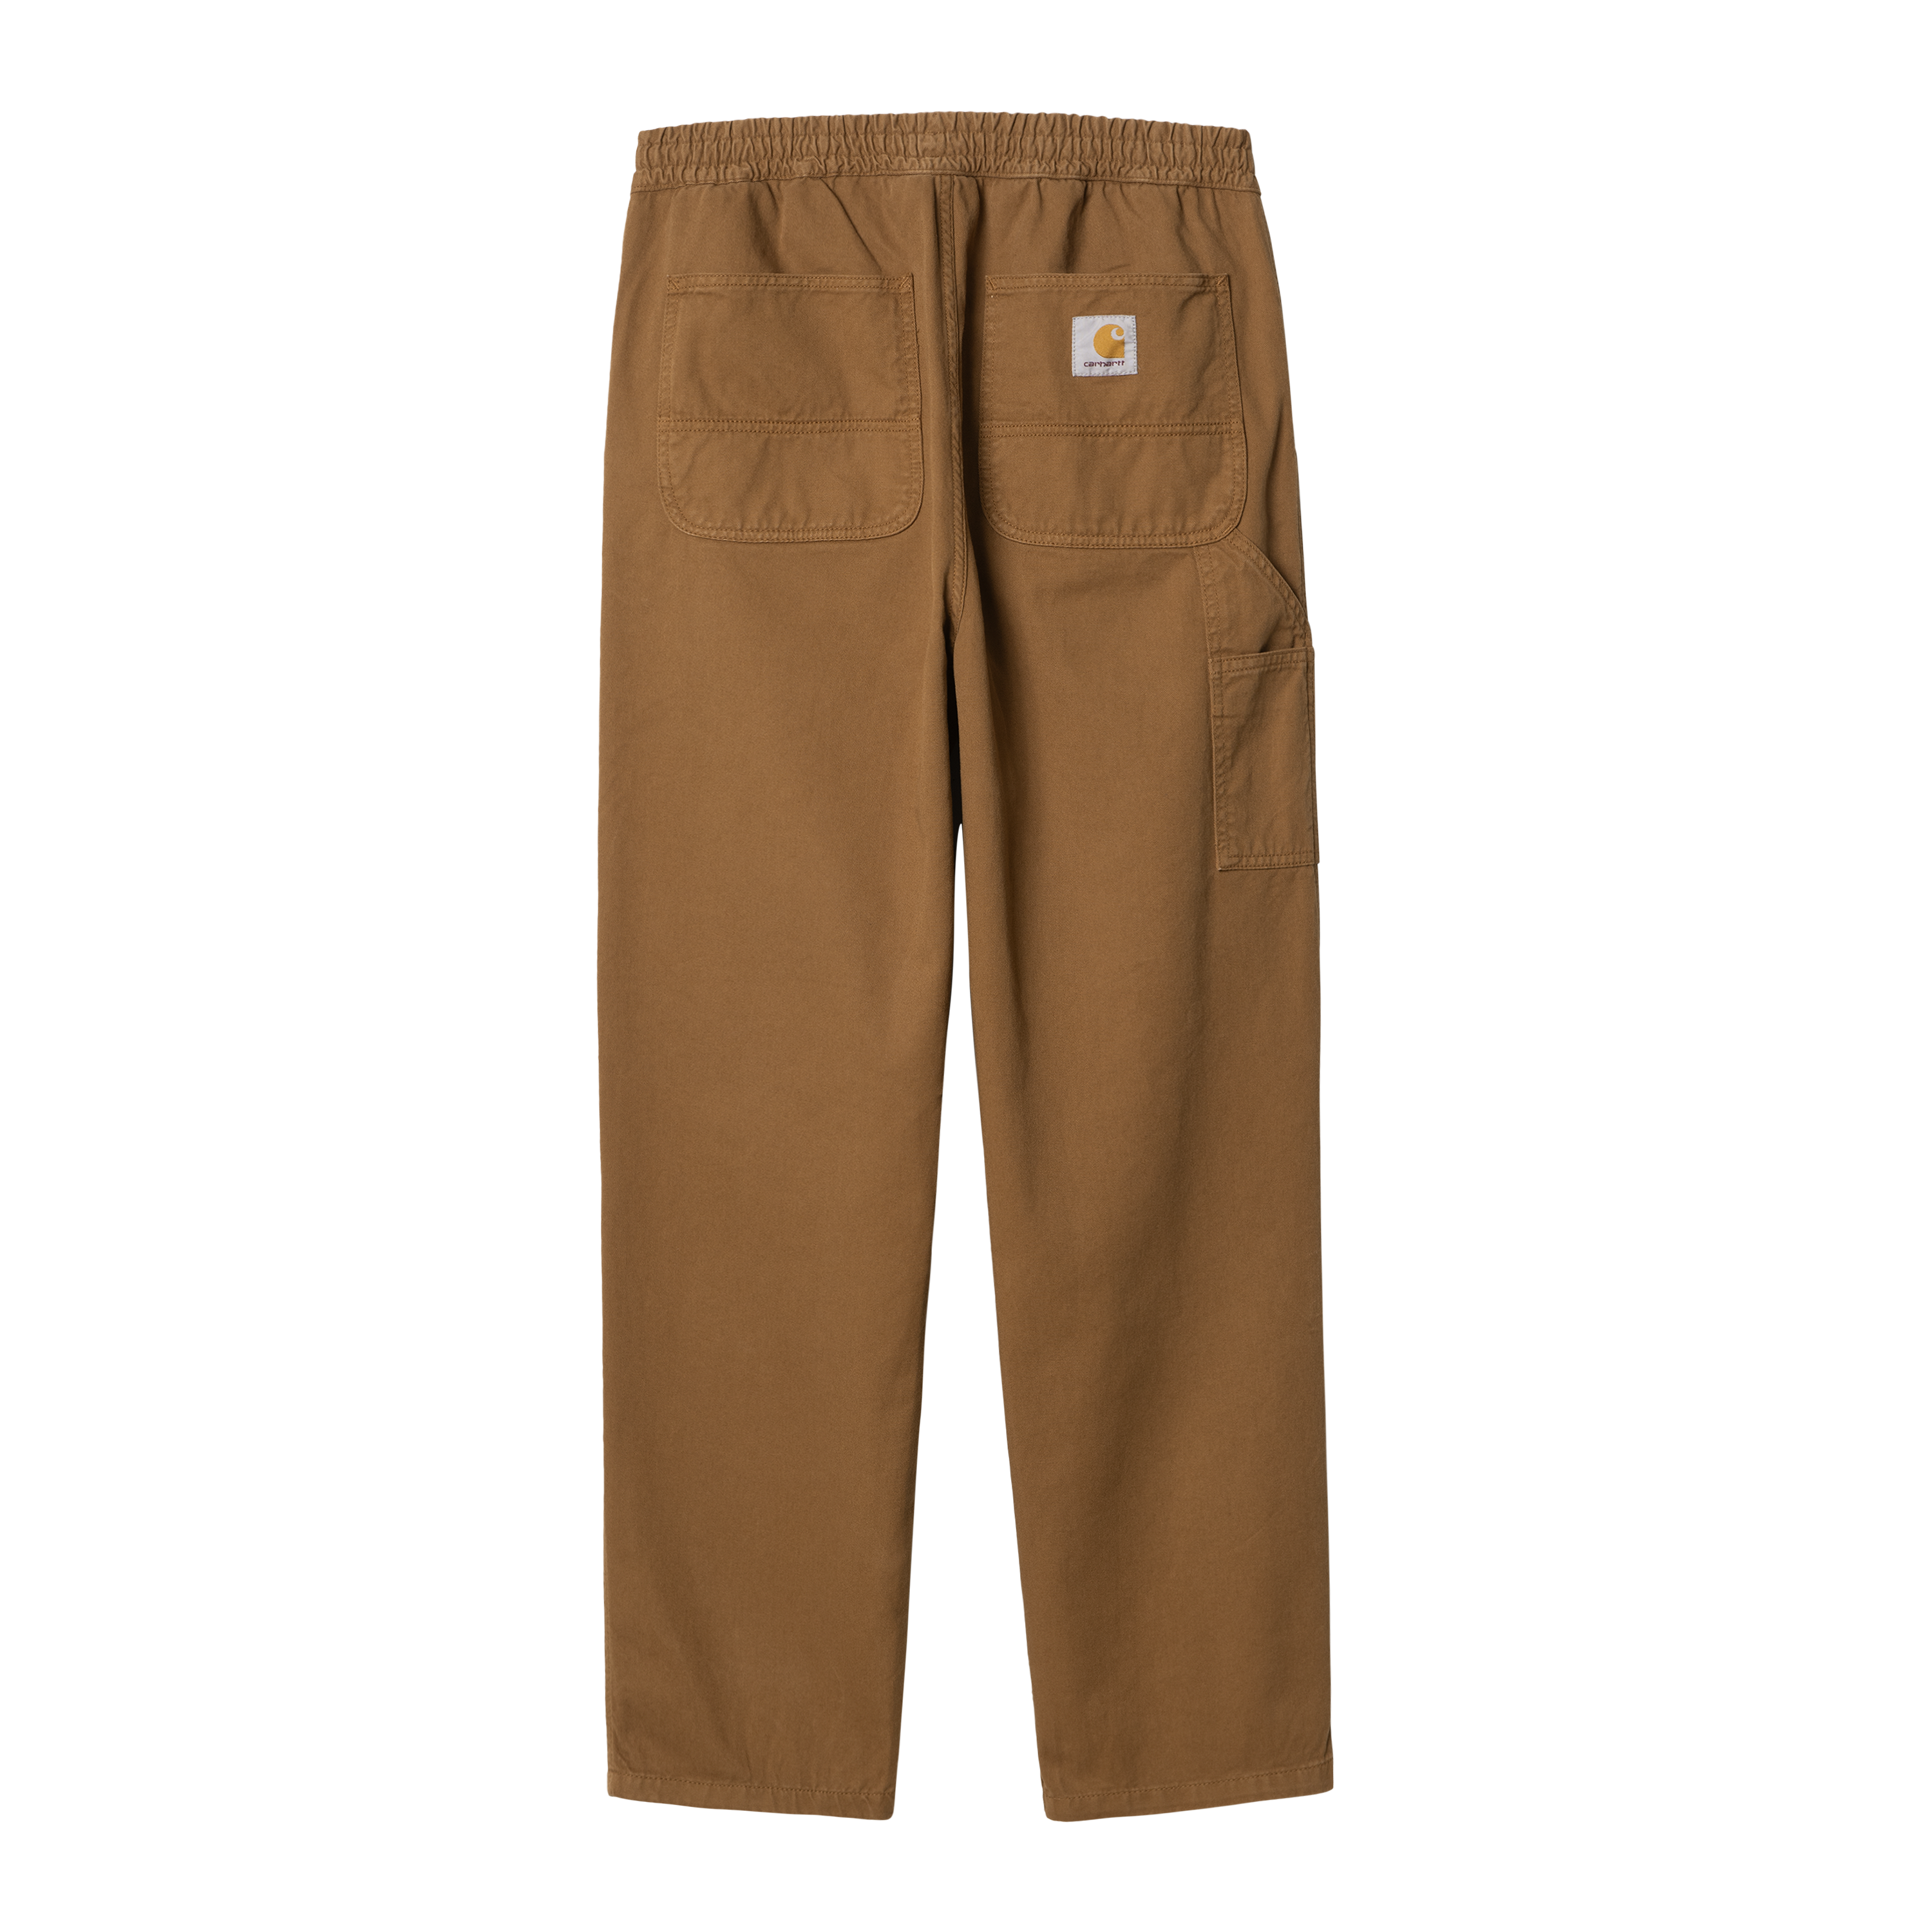 CARHARTT WIP FLINT PANT I029919 HAMILTON BROWN TWILL GARMENT DYED Size M  Color Brown